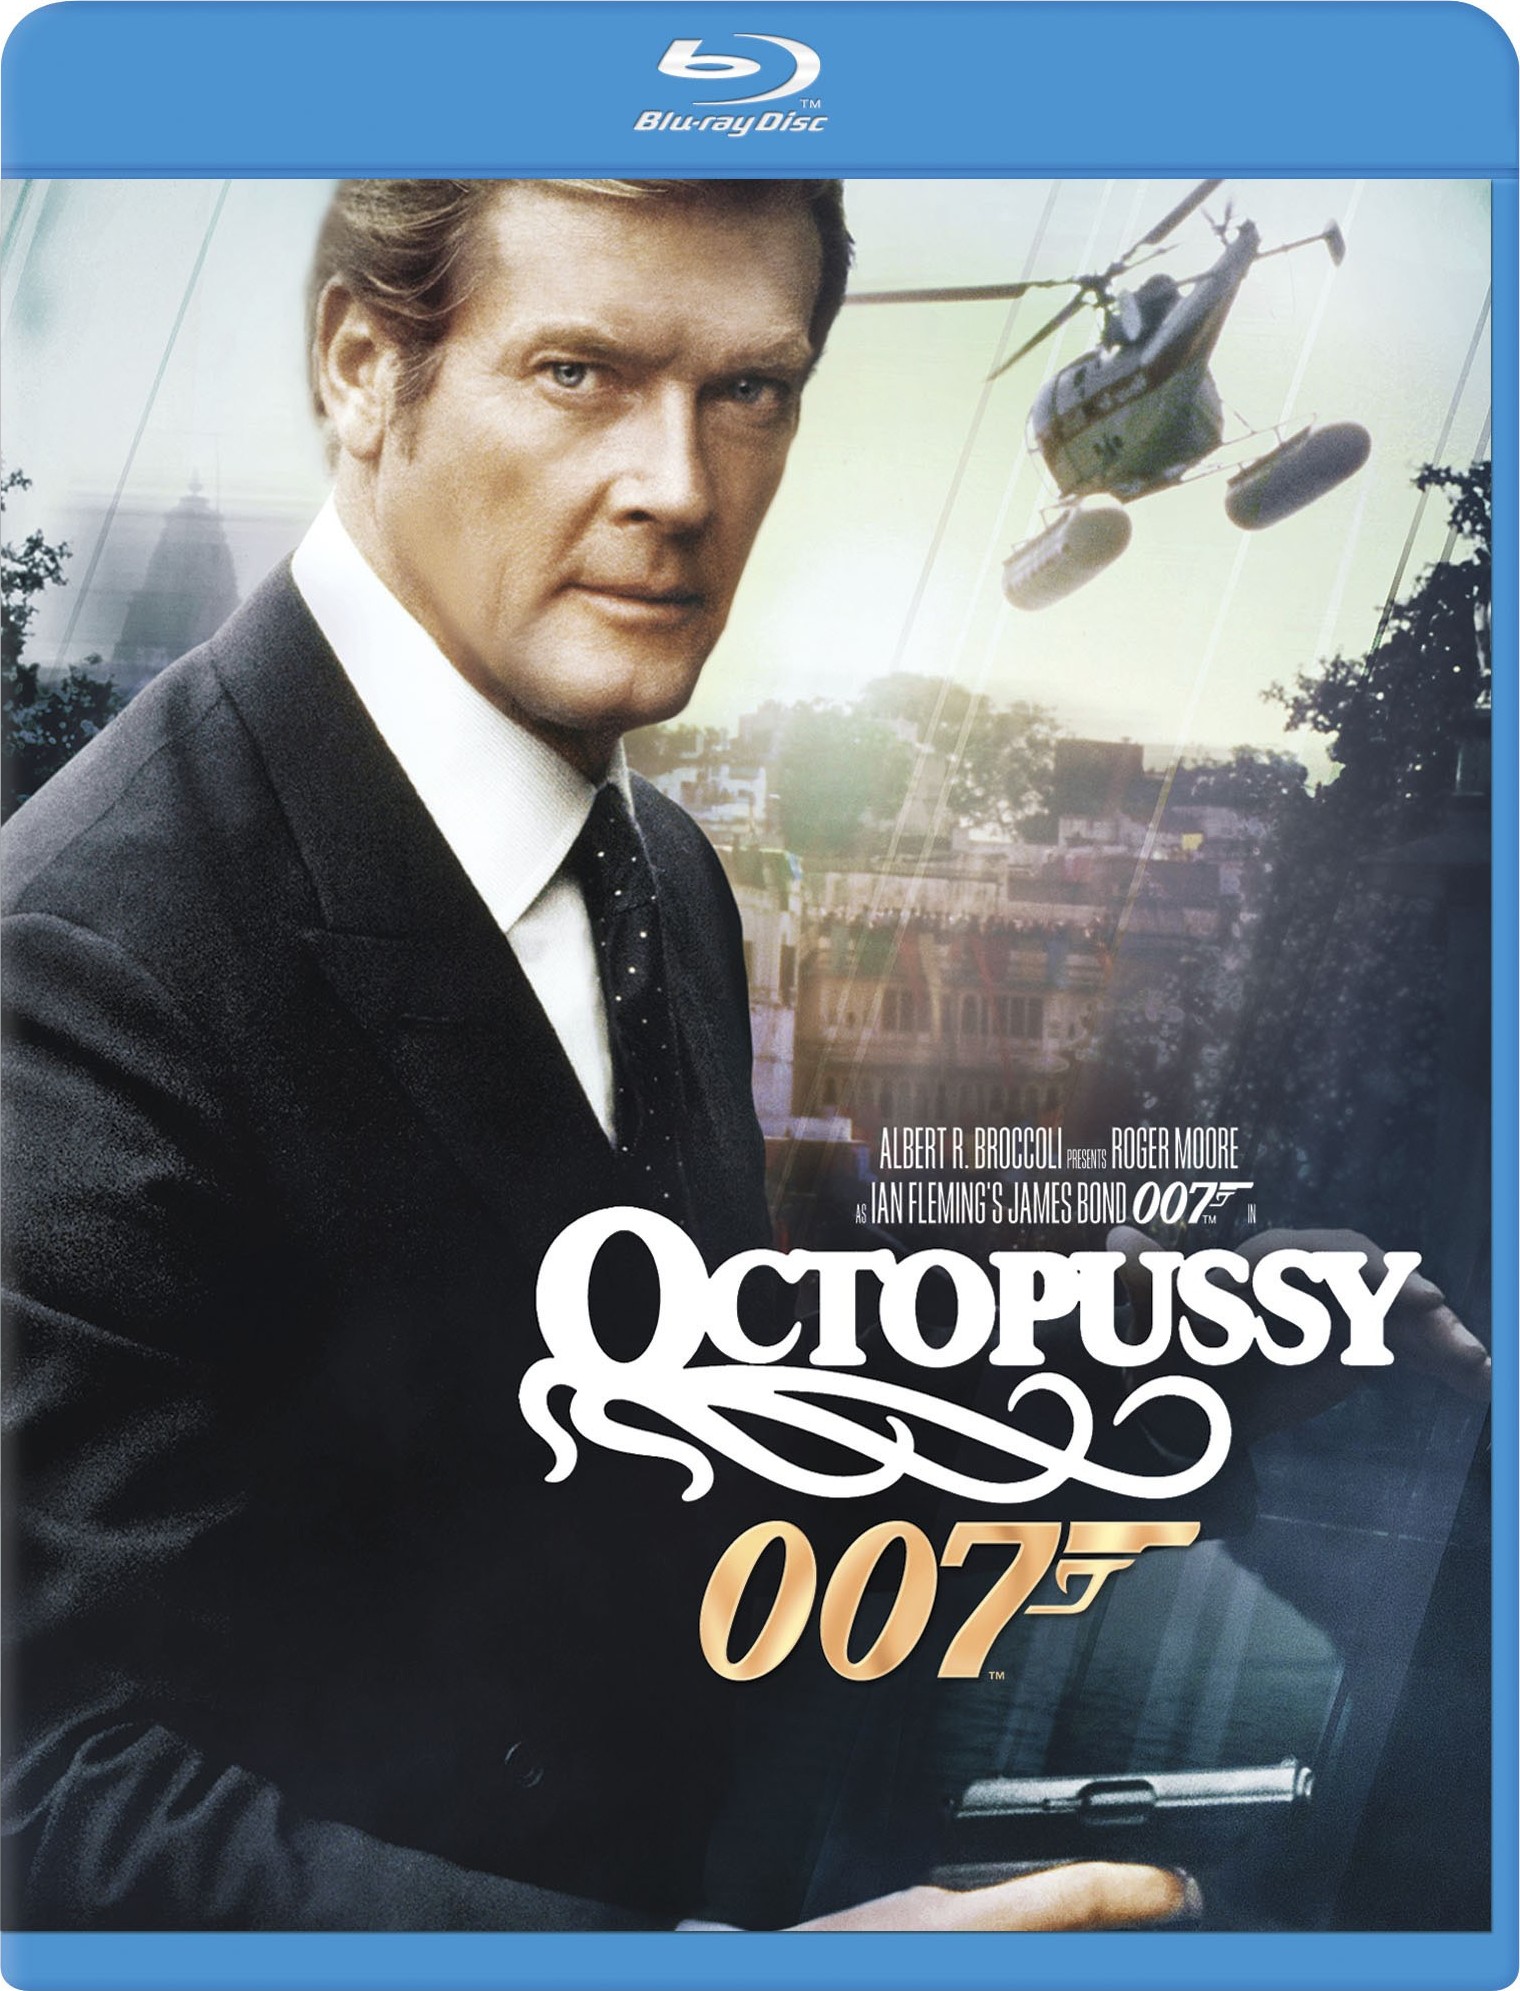 Octopussy Pics, Movie Collection